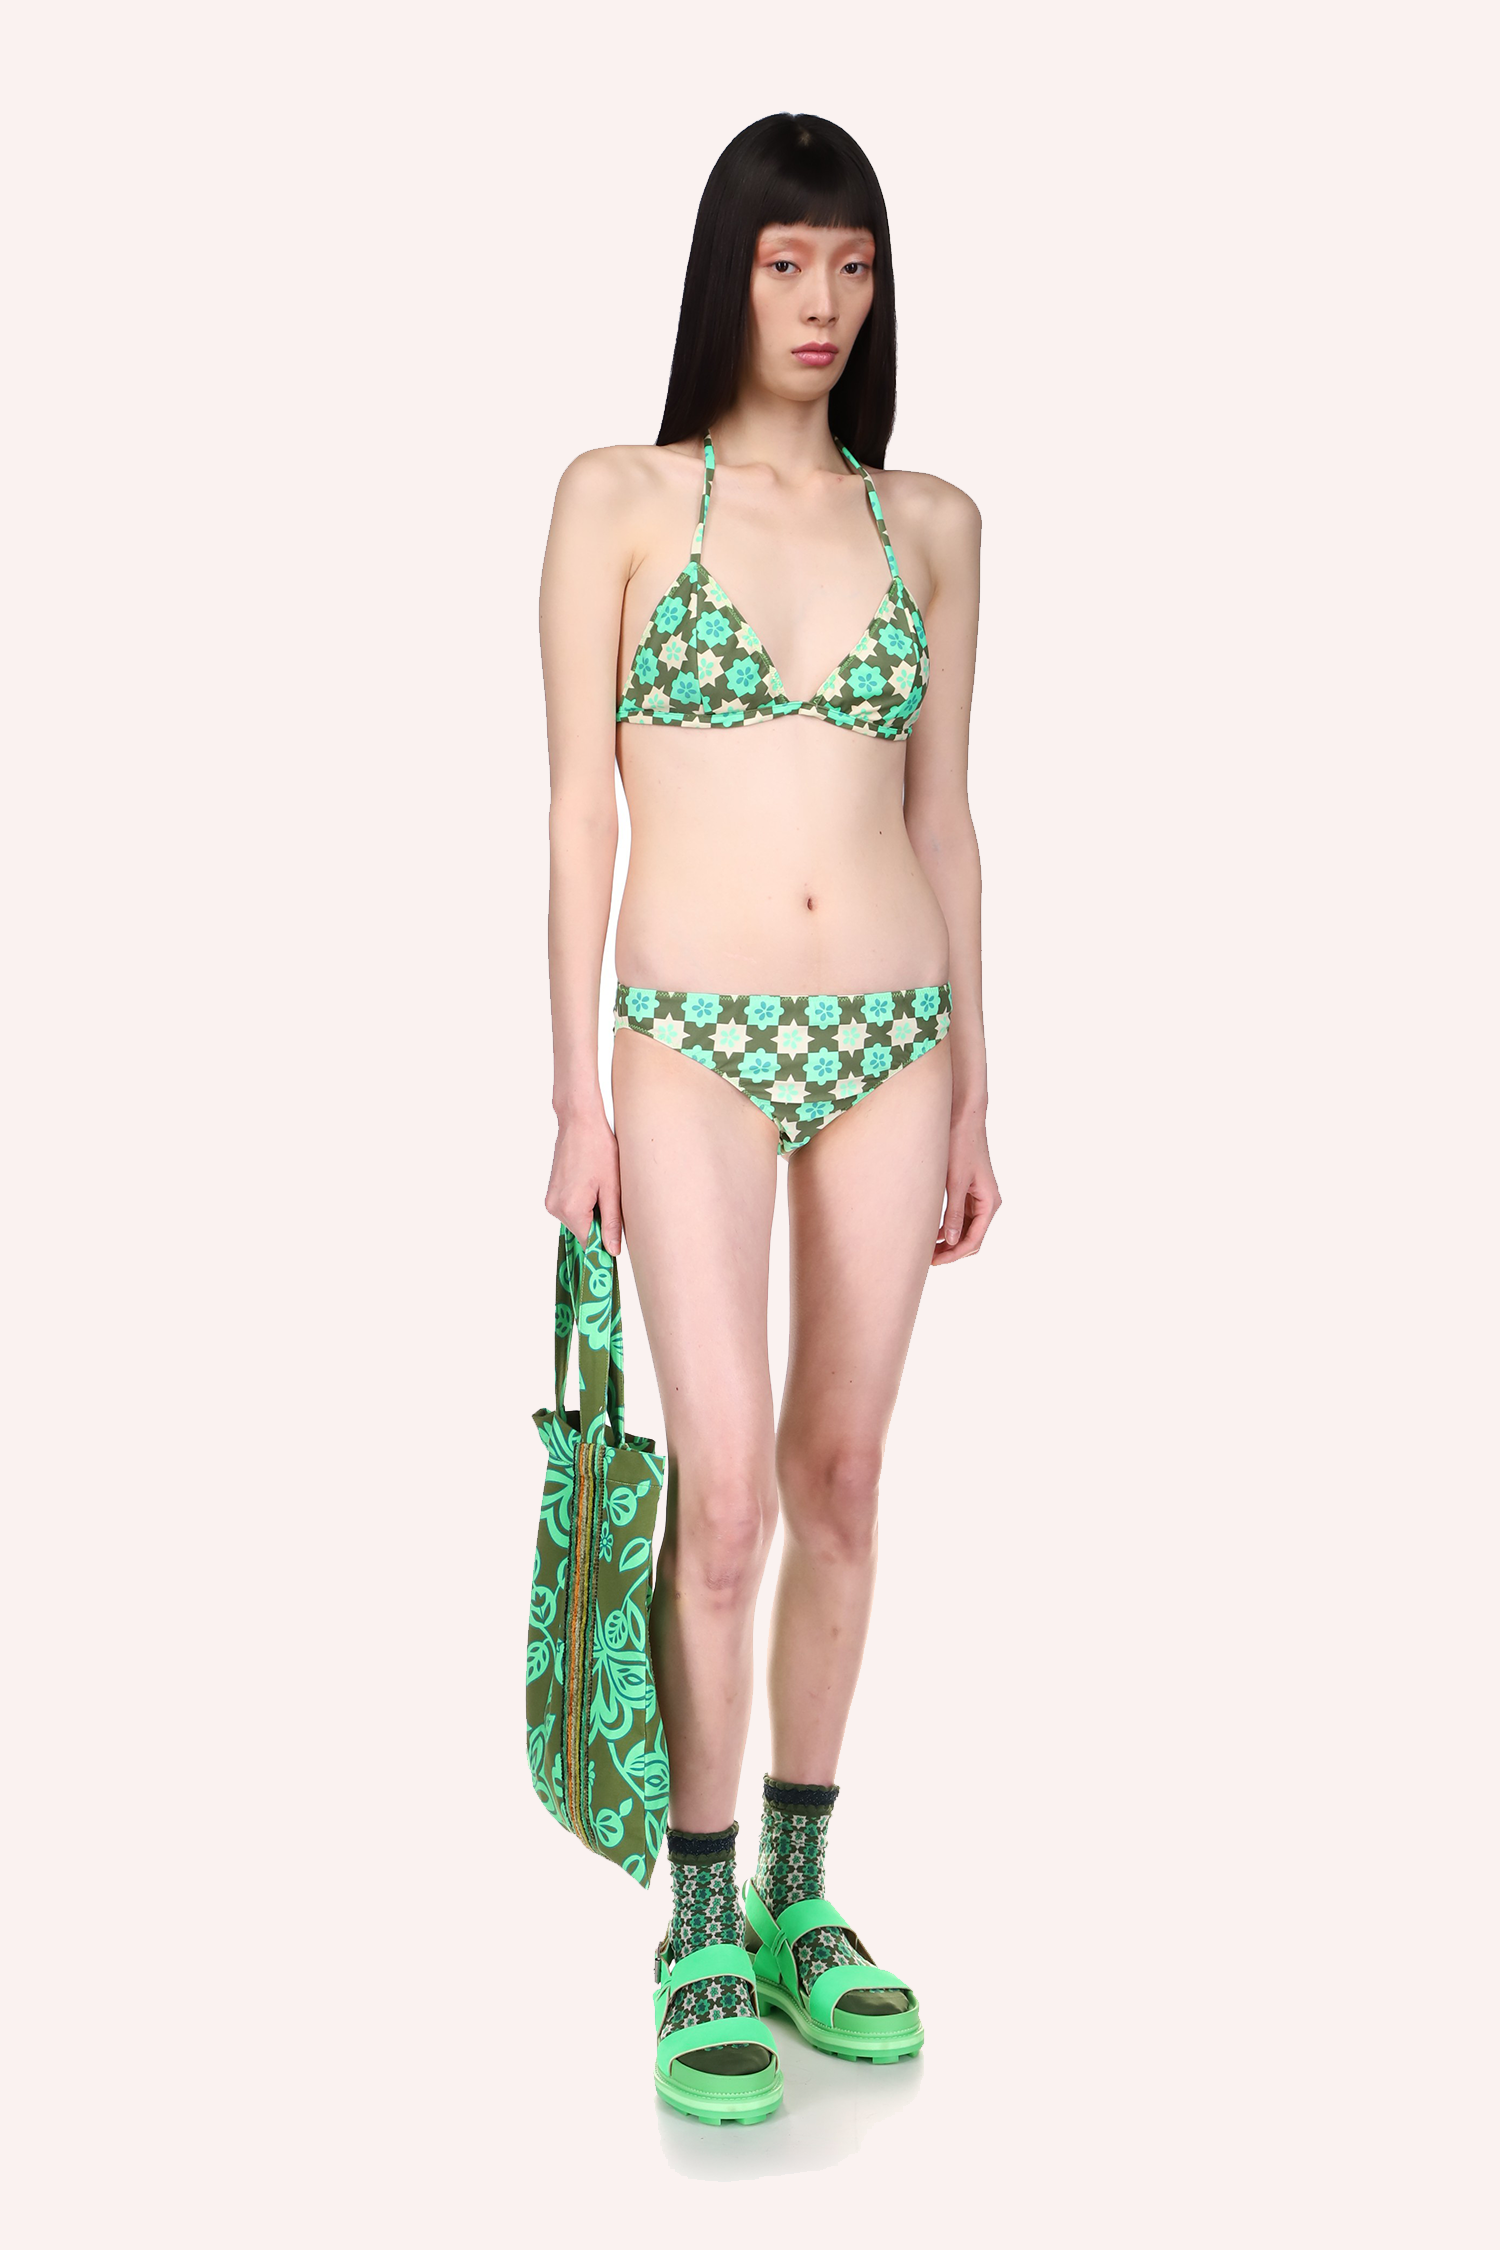 Utopian Gingham Triangle Bikini Set Glo Green perfect combination for the beach or for being lazy in the sun anywhere.